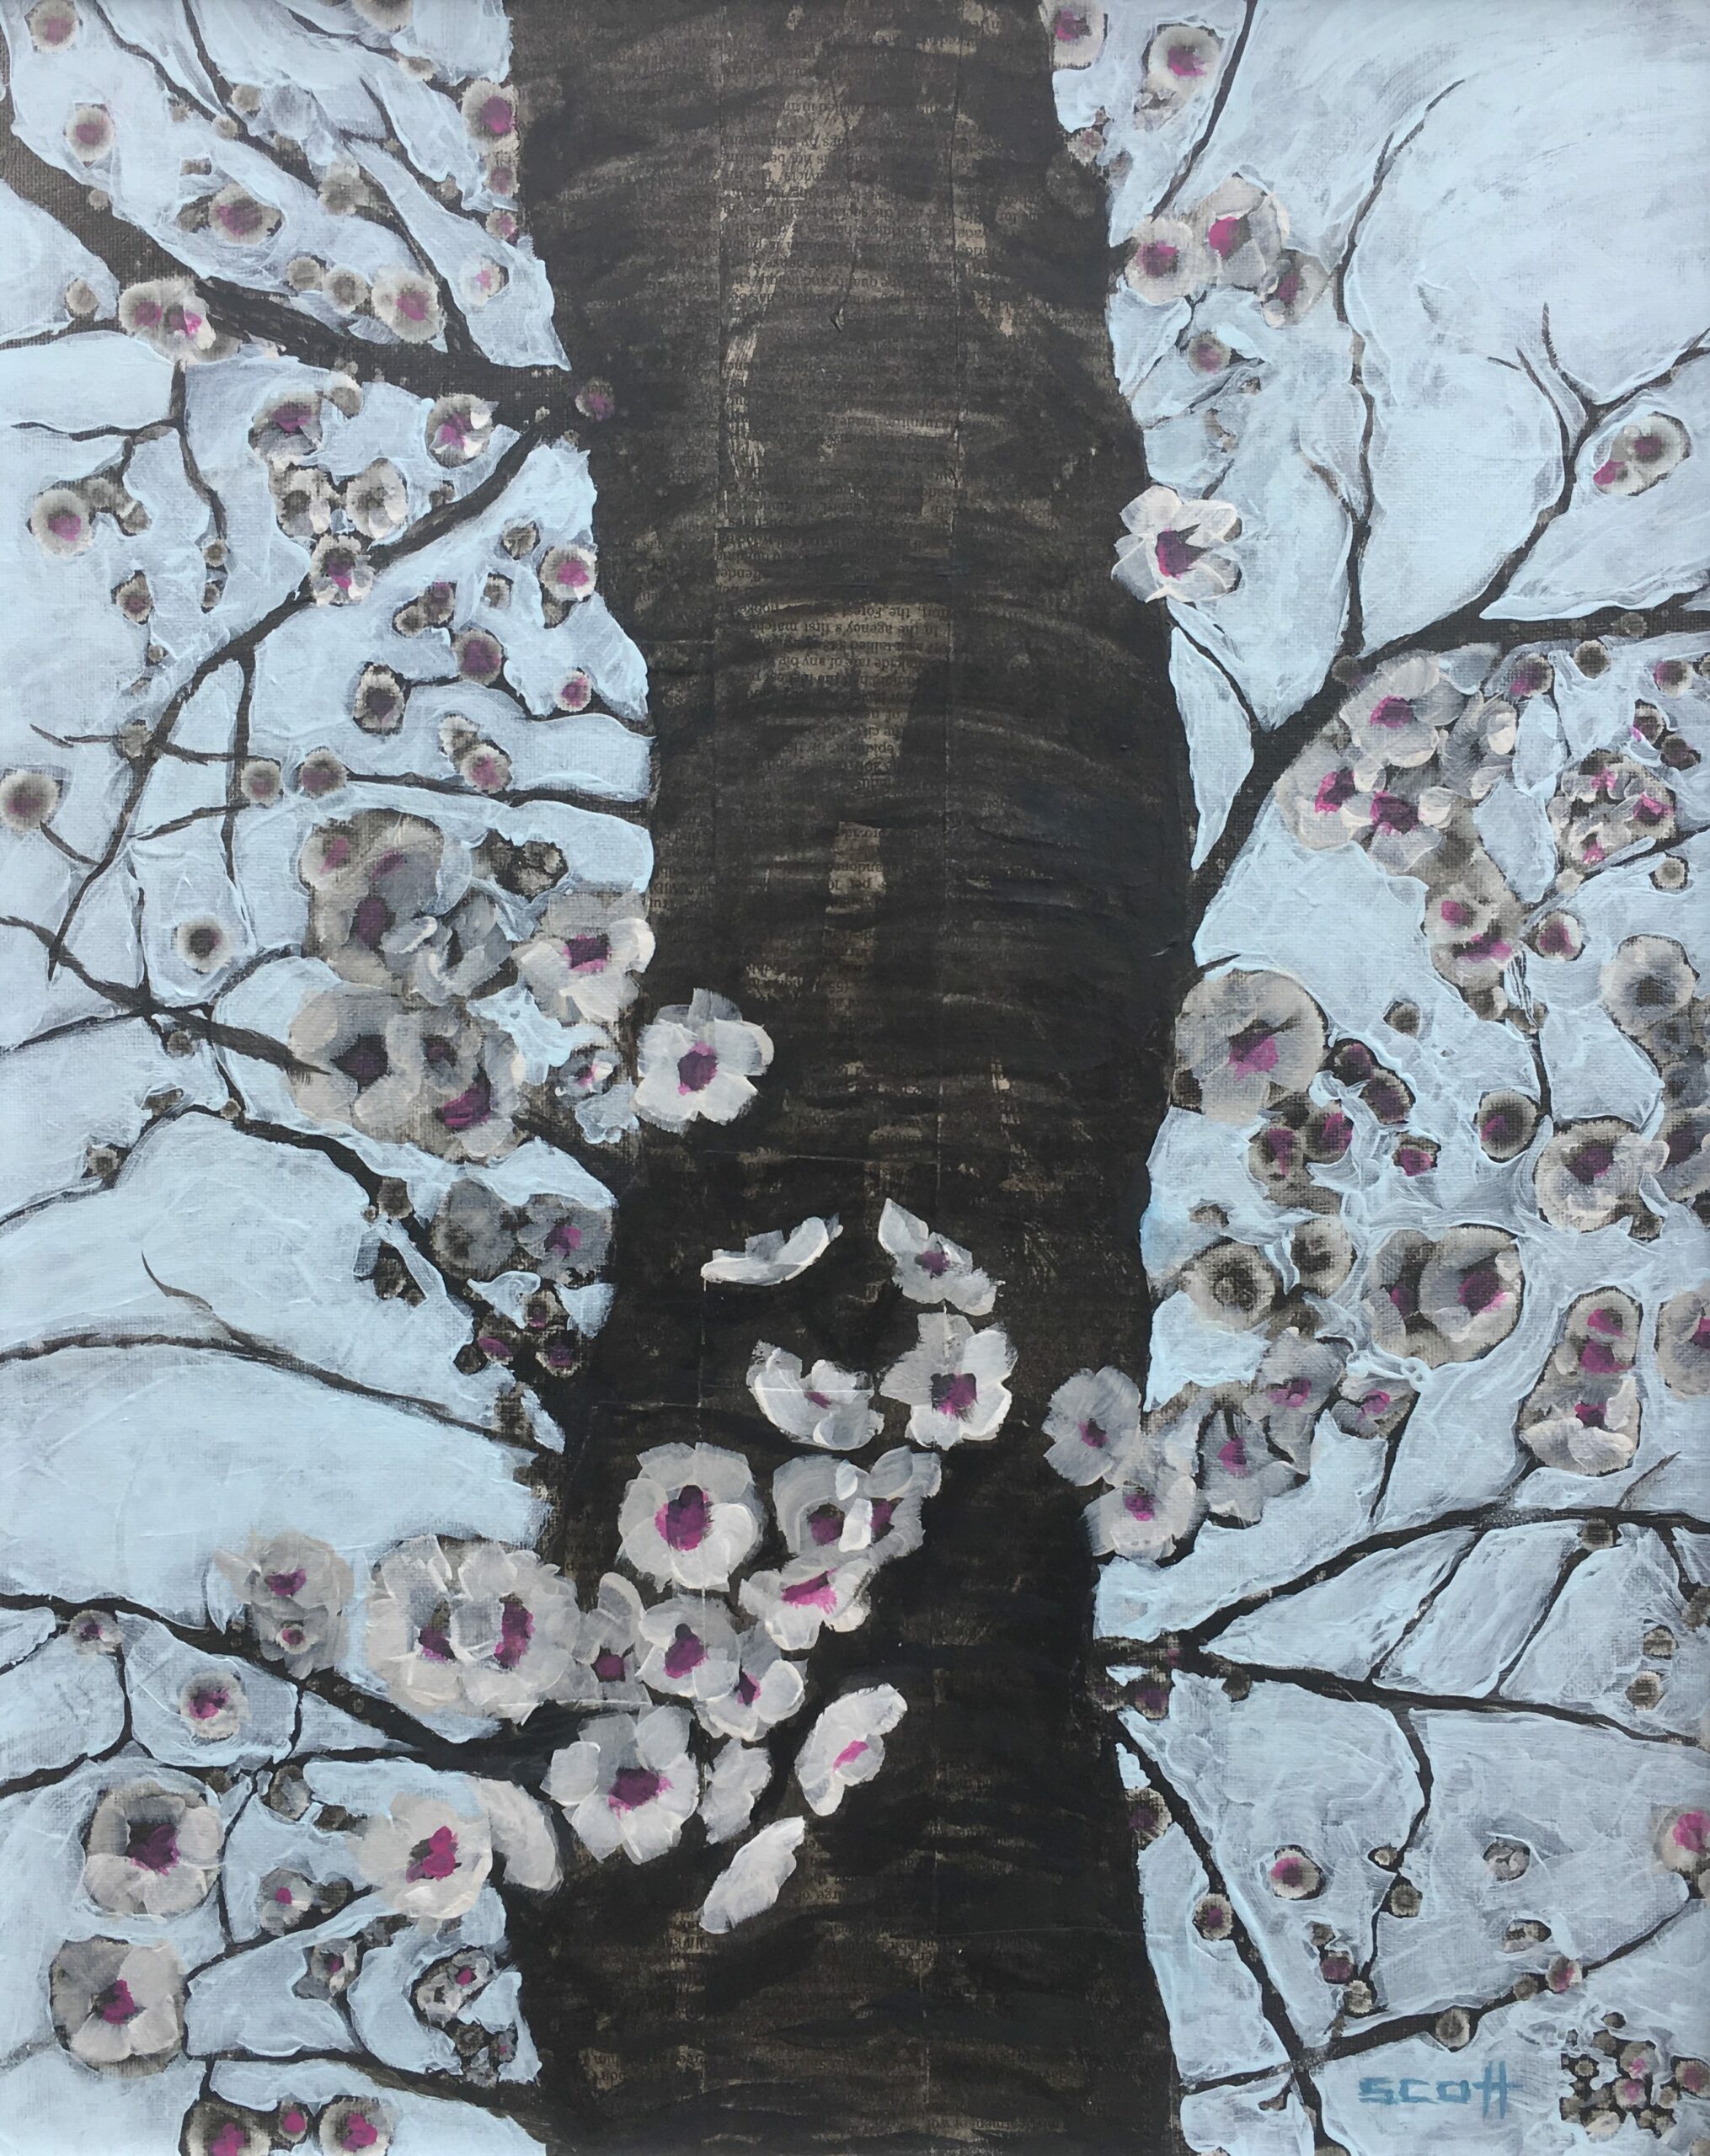 A painting of the trunk of a cherry tree